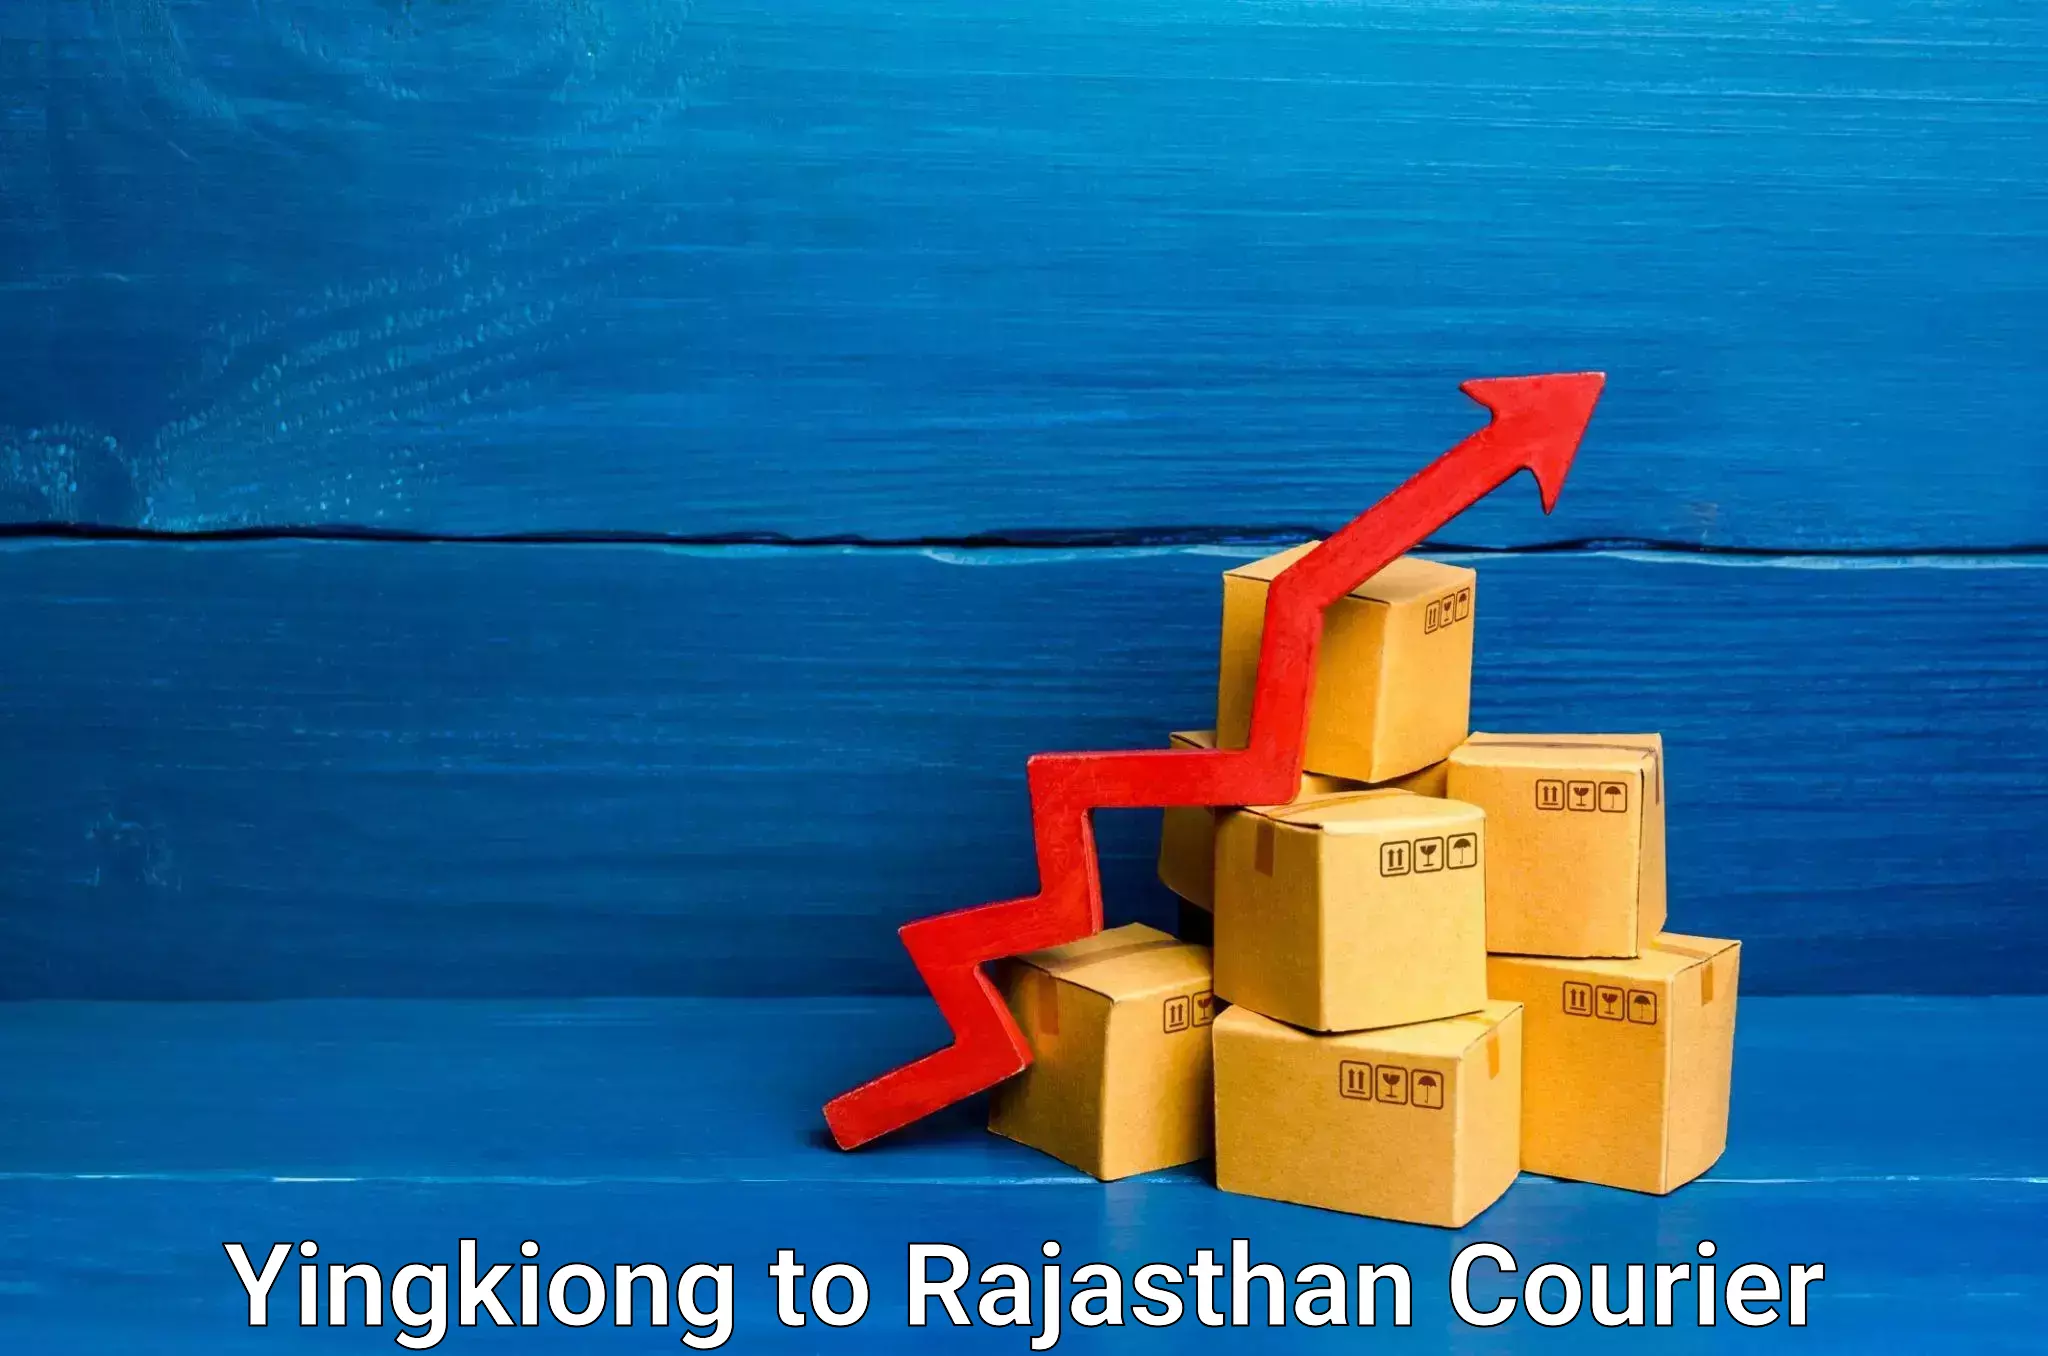 Express mail service Yingkiong to Rajasthan